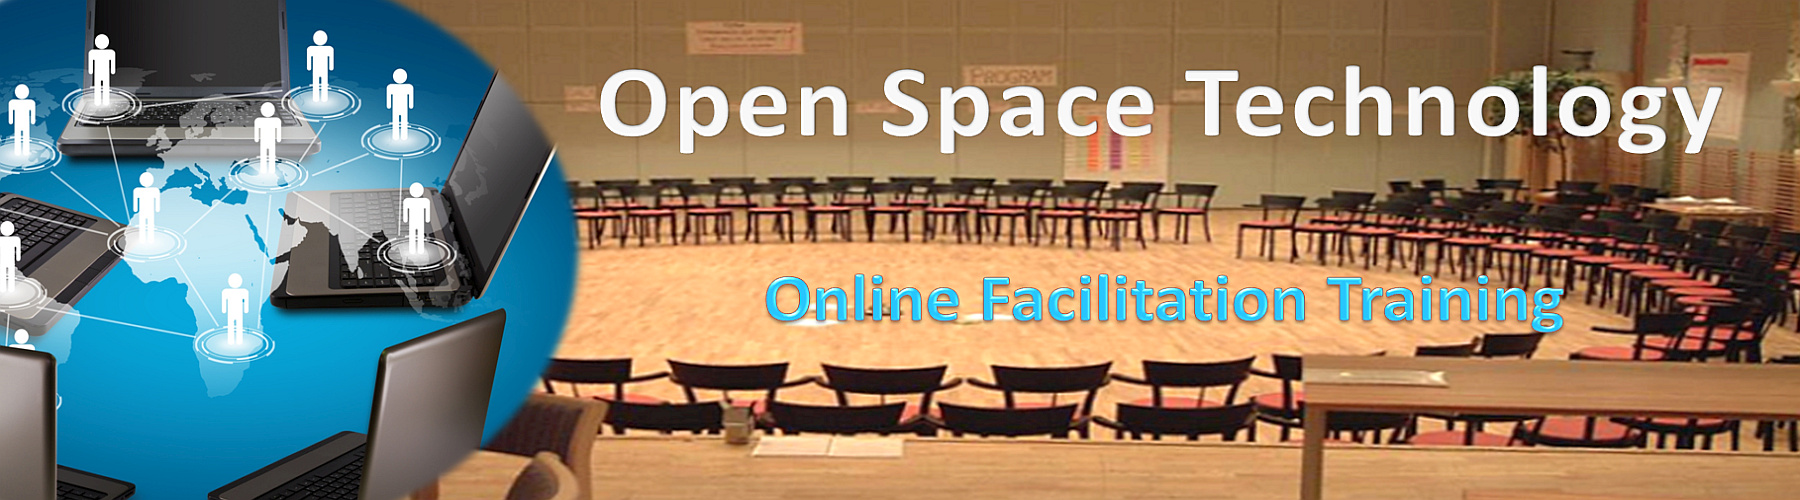 Open Space Technology Training